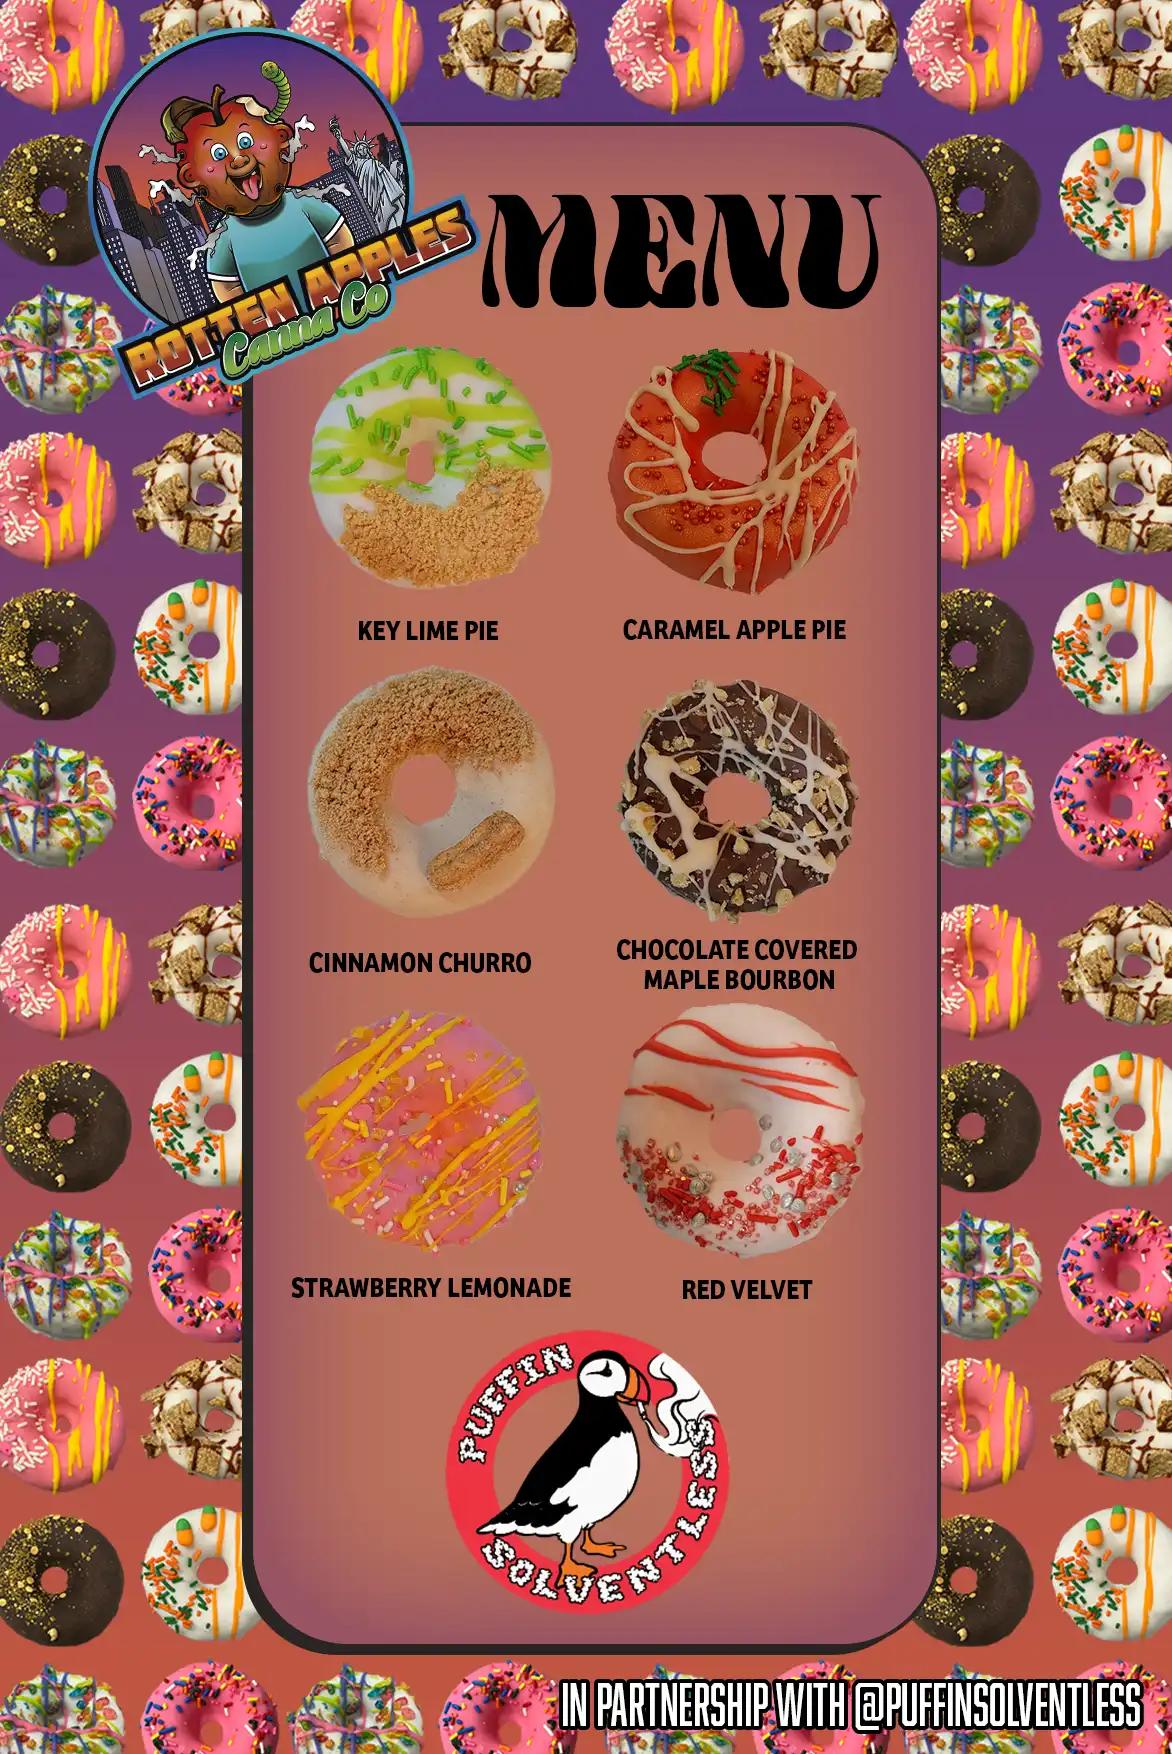 Rotten Apples Canna Co.'s donut menu in collaboration with Puffinsolventless including six donuts, the Key Lime Pie Donut, Caramel Apple Pie Donut, Cinnamon Churro Donut, Chocolate Covered Maple Bourbon Donut, Strawberry Lemonade Donut, and the Red Velvet Donut.